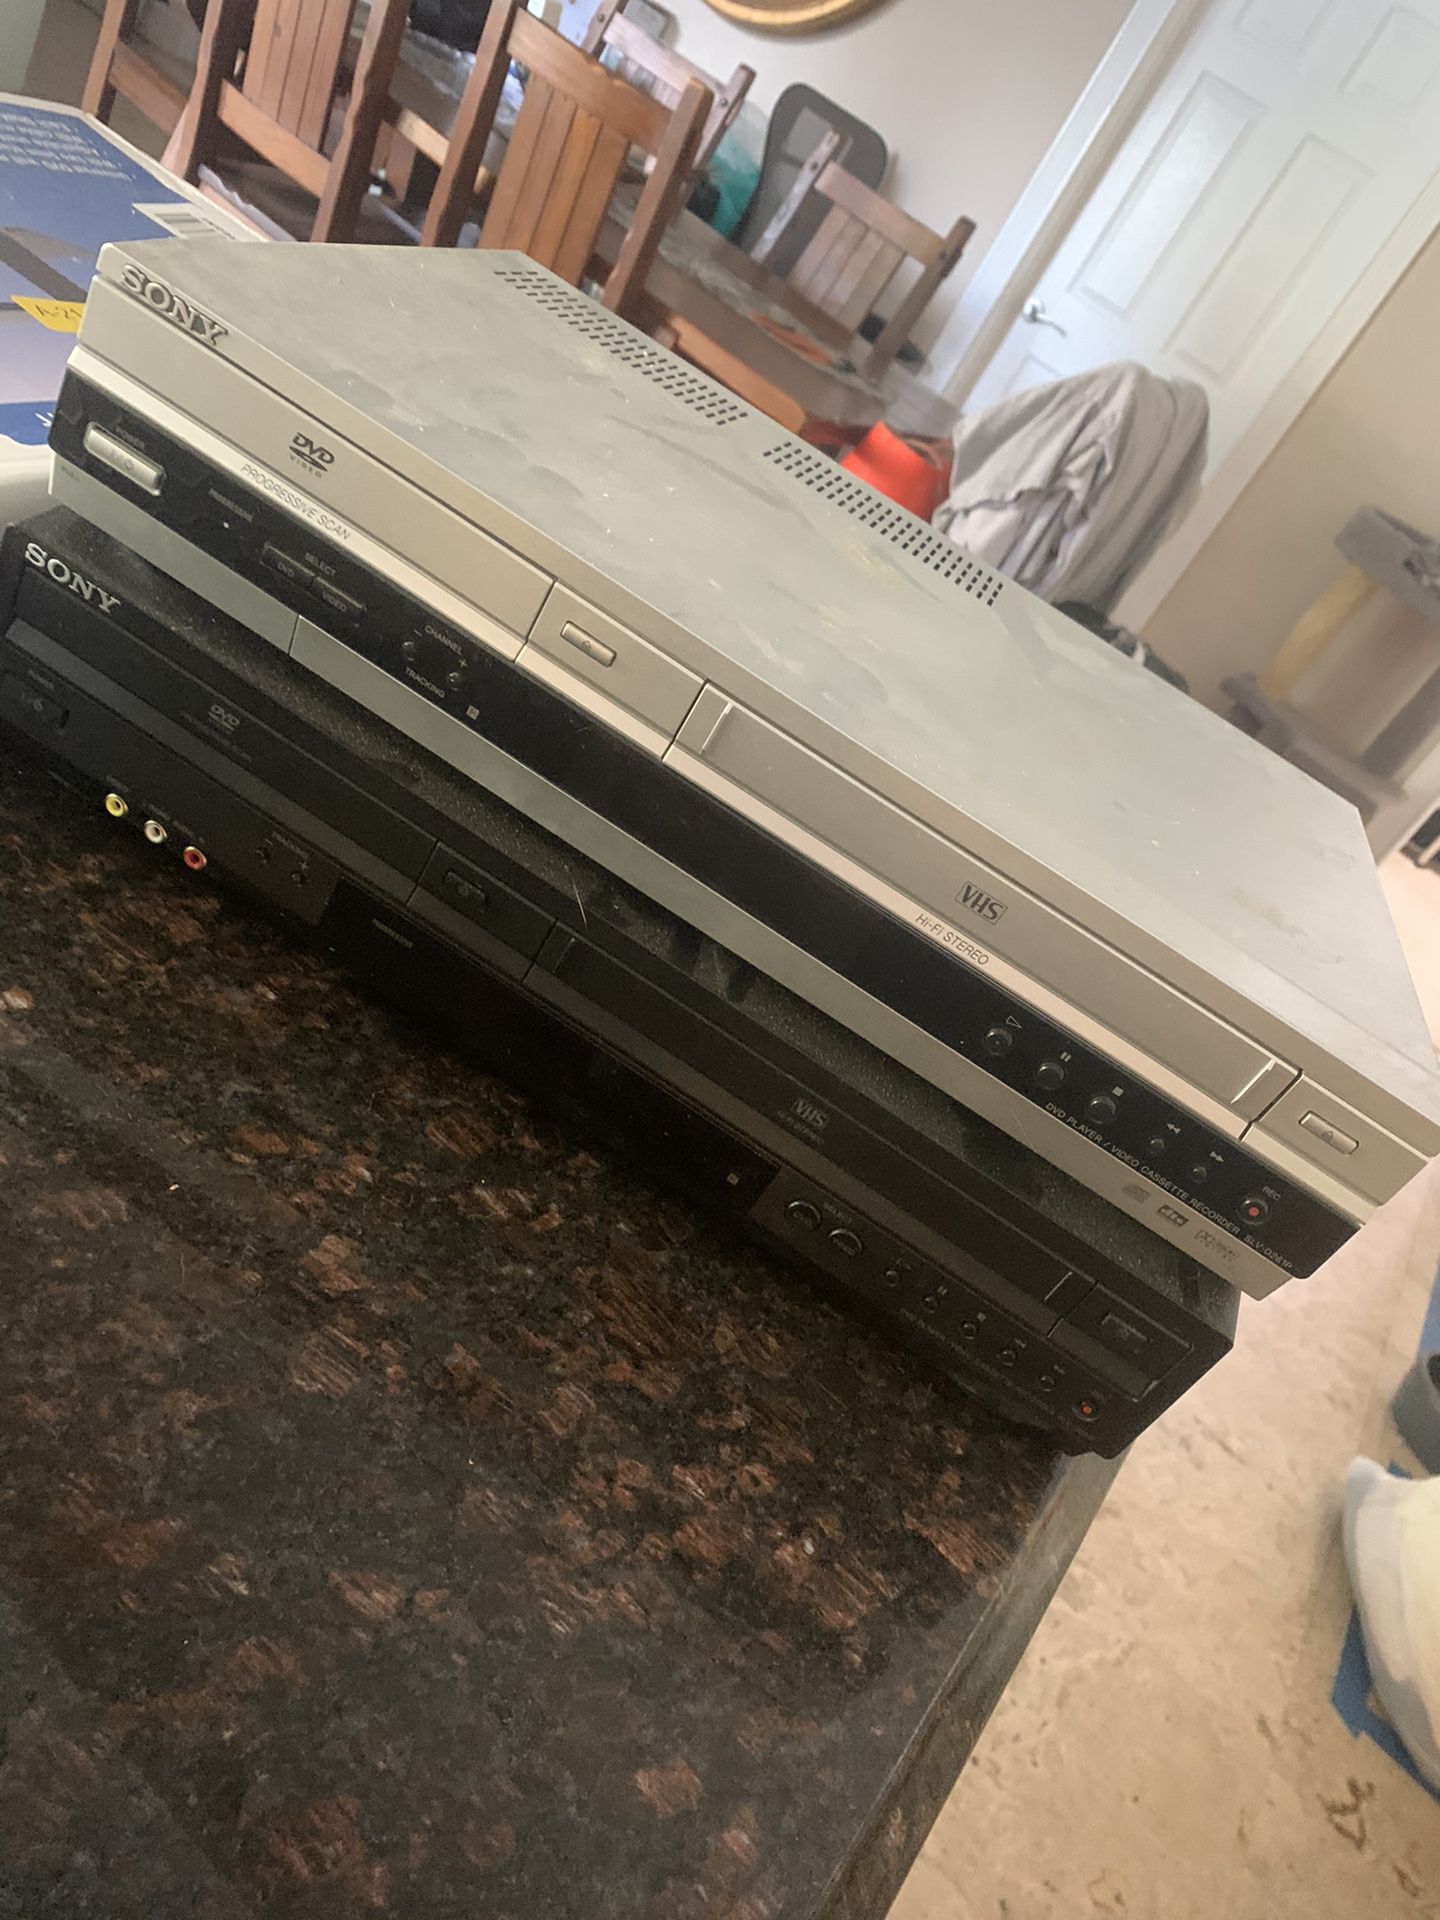 Sony vcr ans DVD player